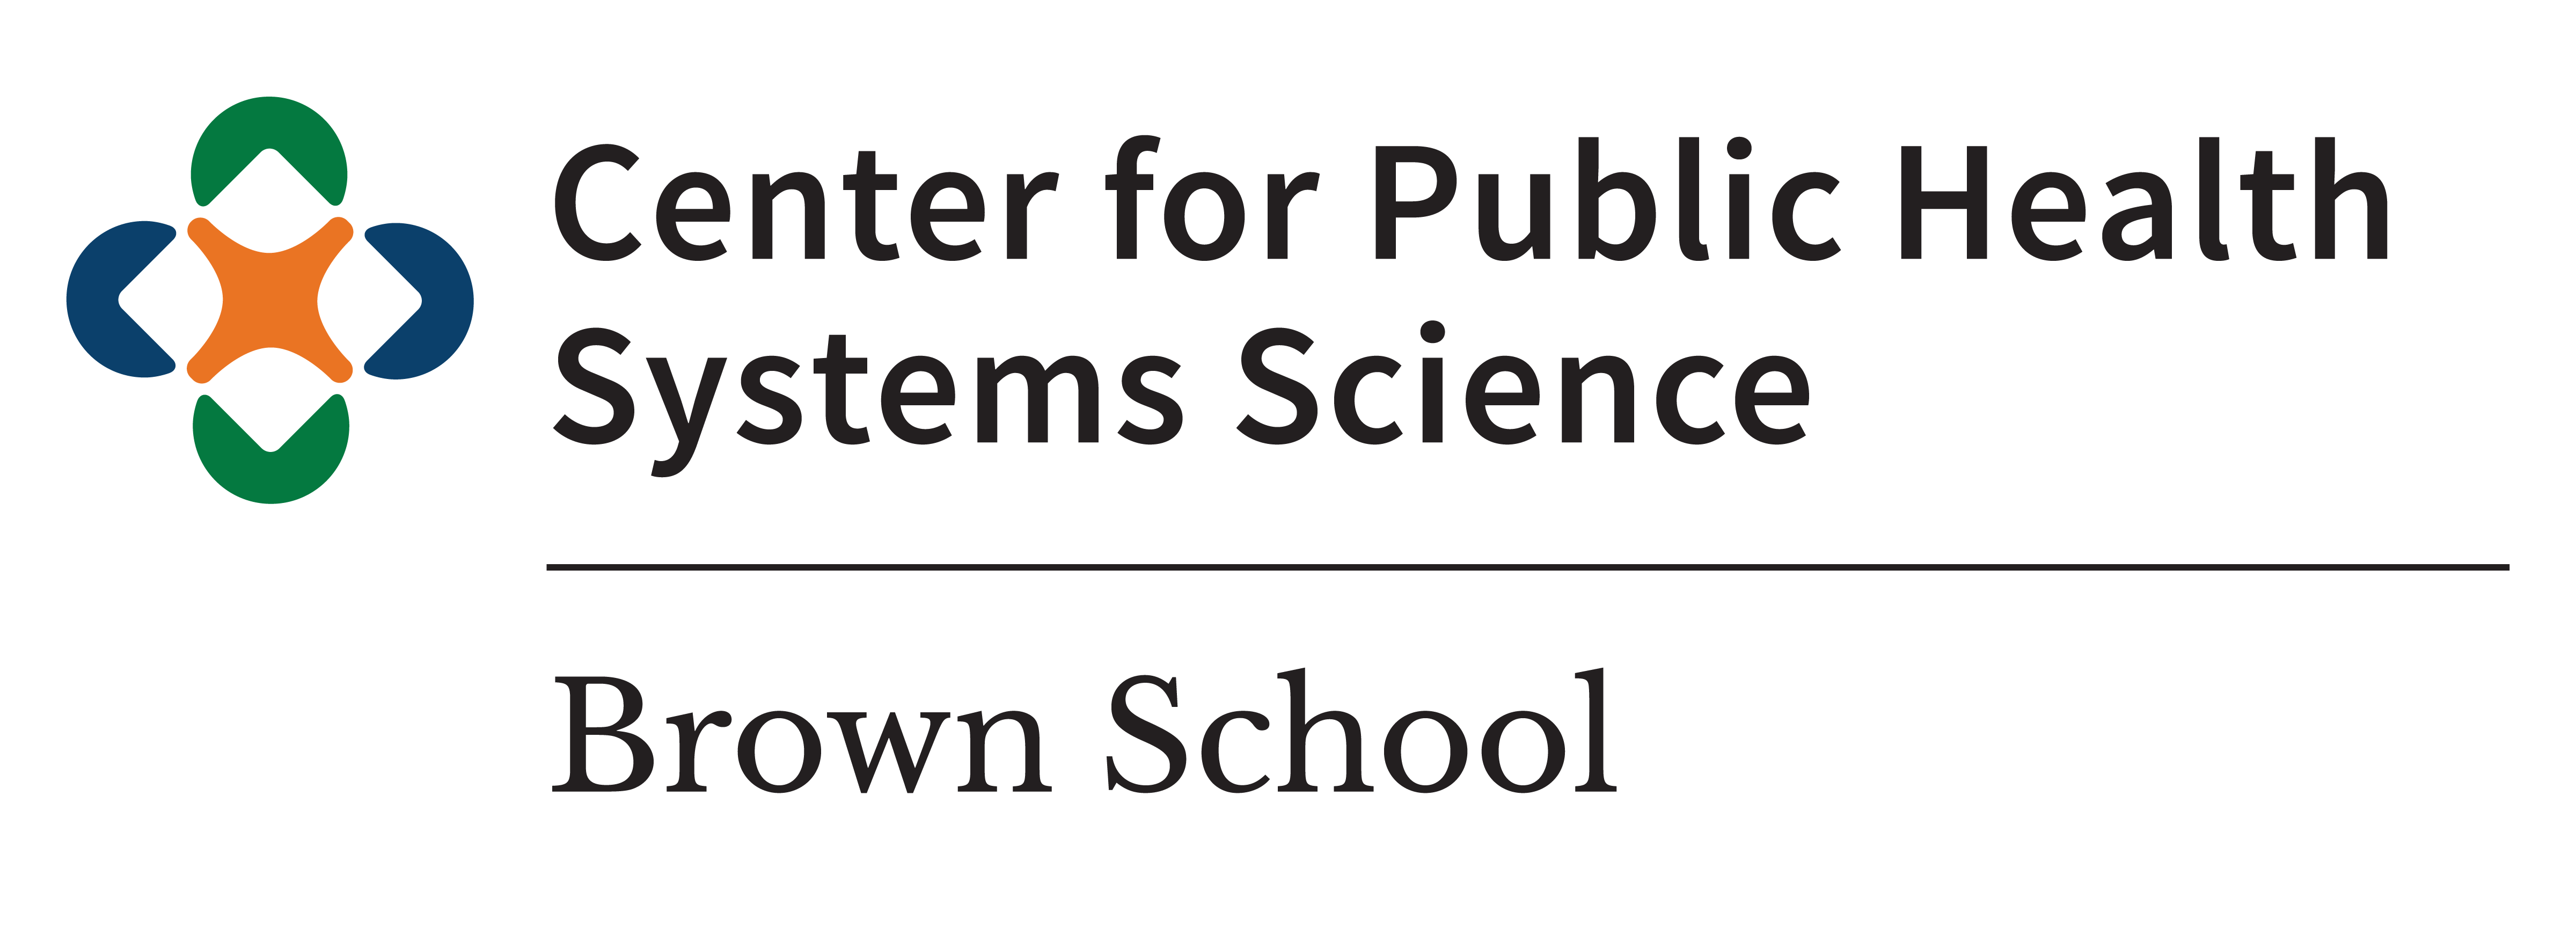 Center for Public Health Systems Science, Washington University in St. Louis